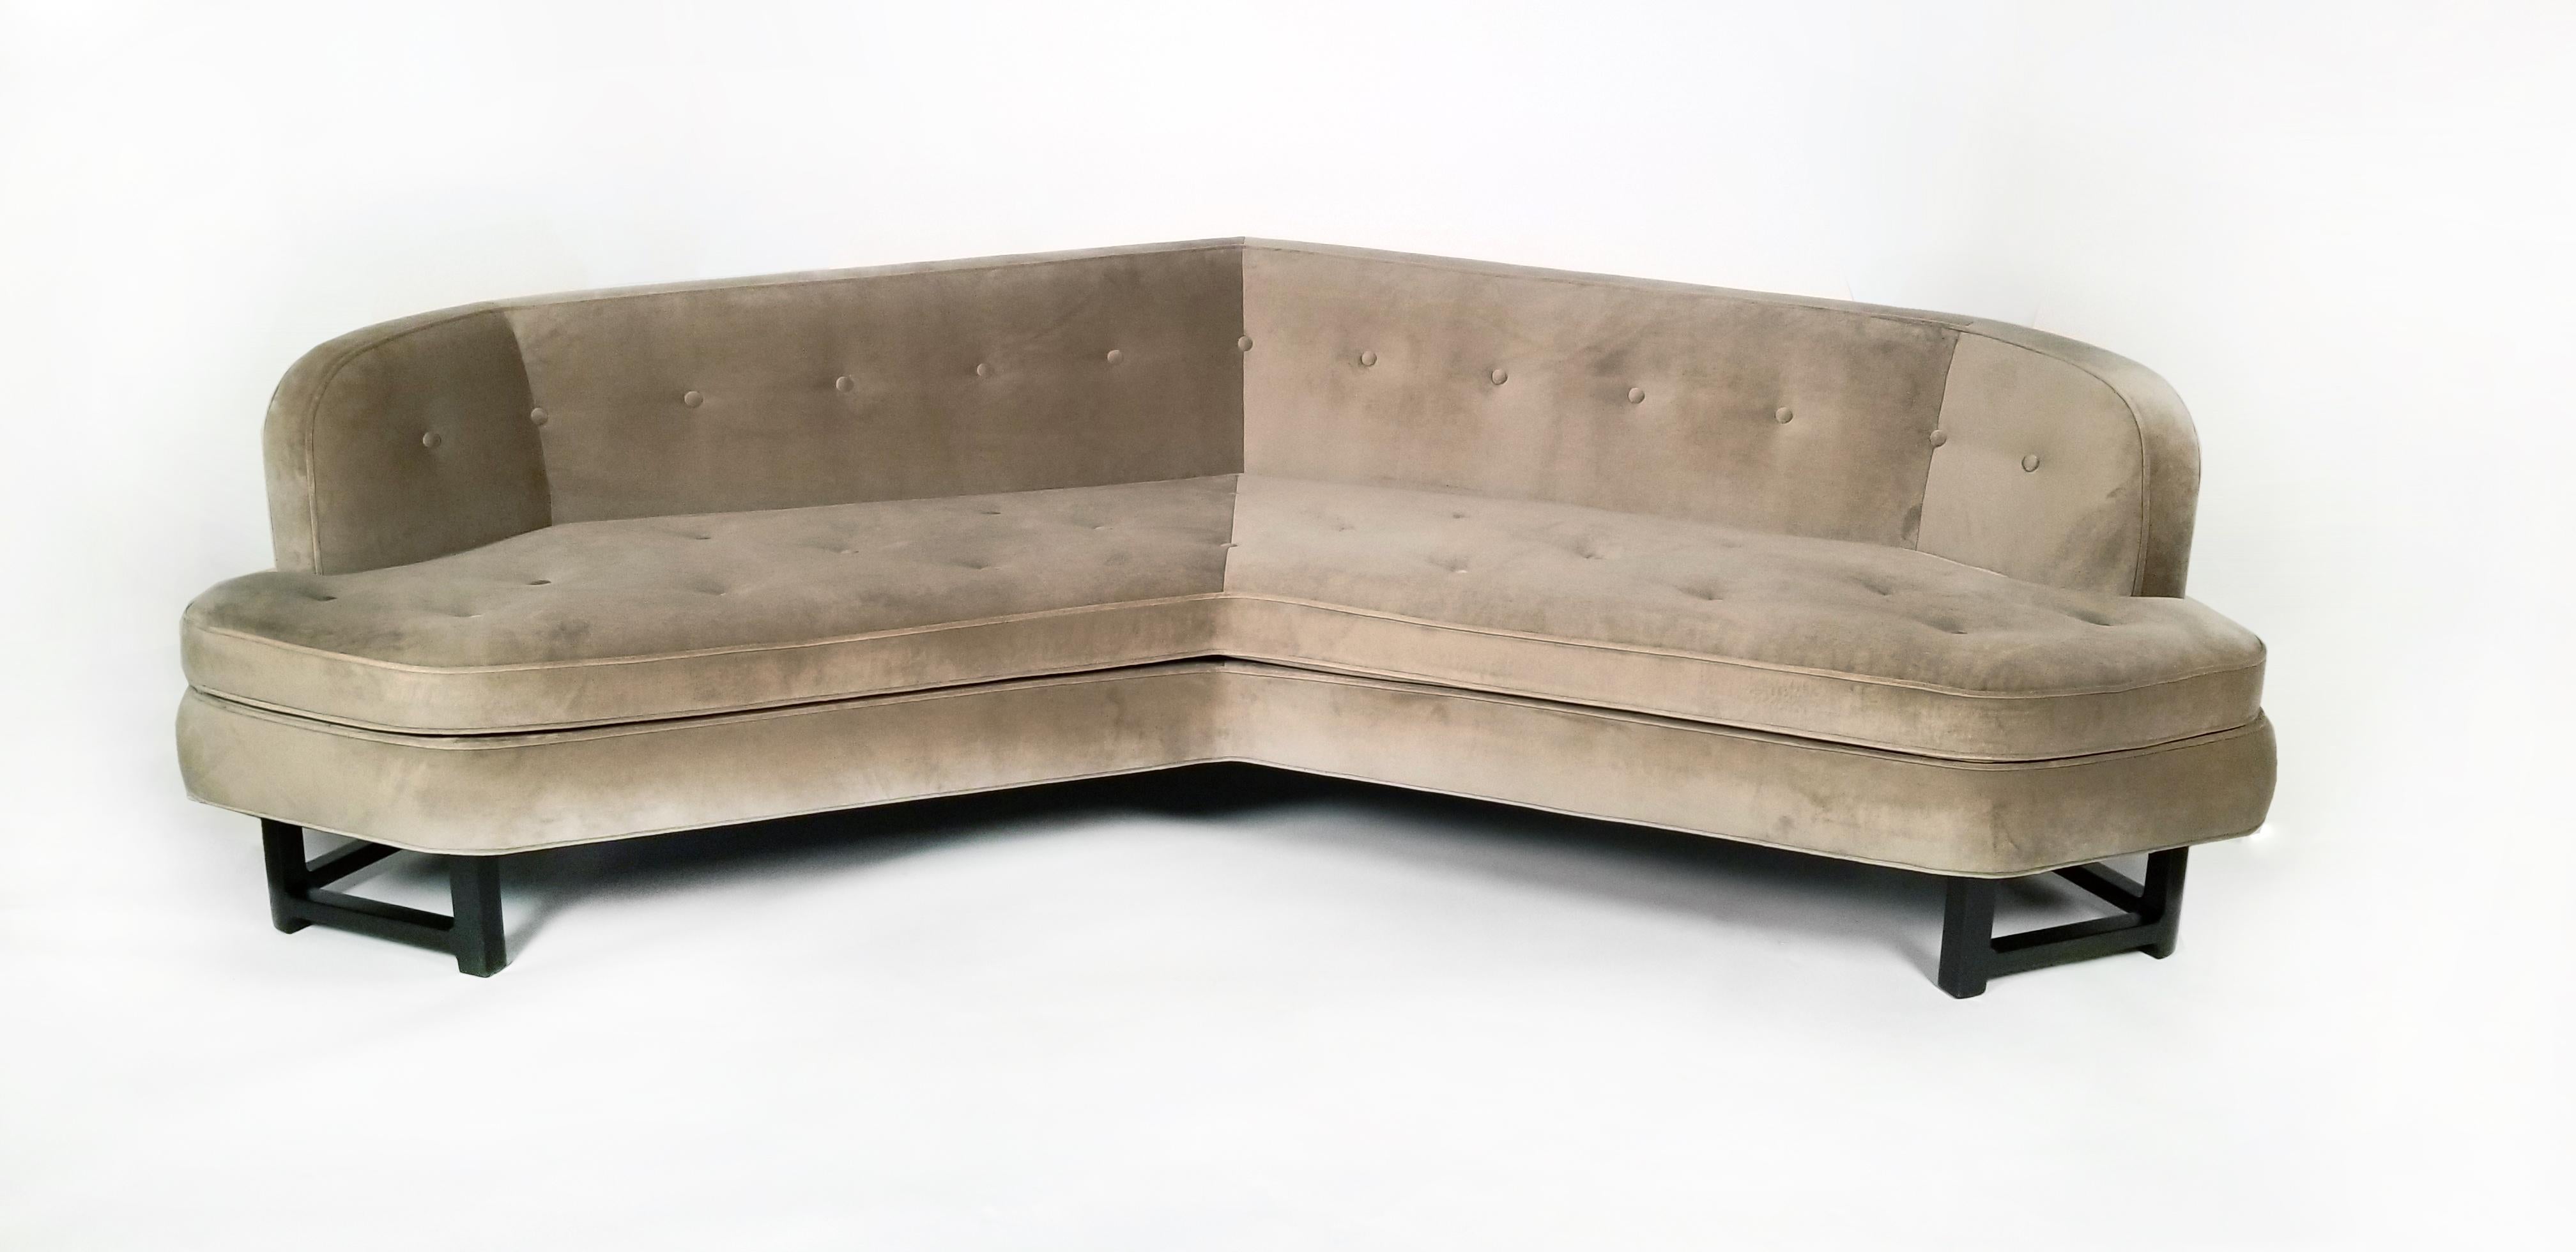 Sofa Model 6329A designed by Edward Wormley for Dunbar. The 6329A is a single sofa design which you arrange not just one way but three. Sofa has been reupholstered in a Perennial velvet has been fully restored and sits on solid mahogany base with